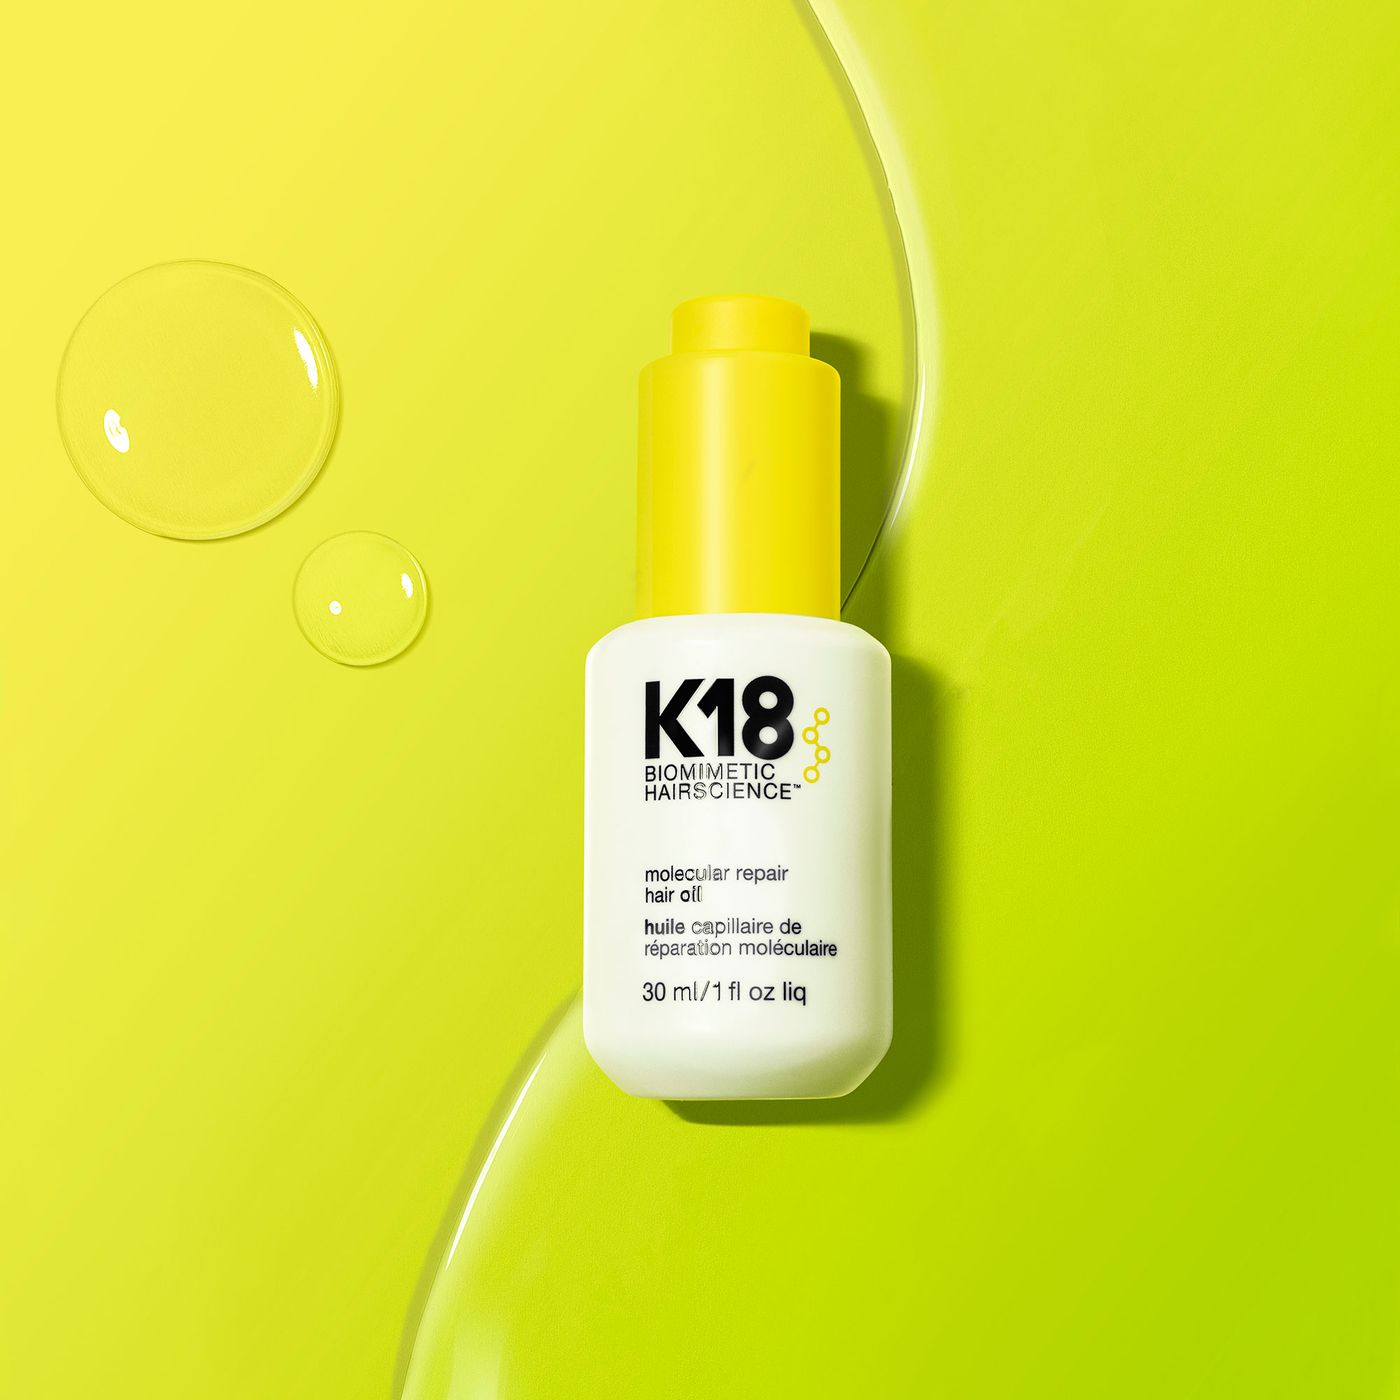 The New K18 Hair Oil You Need